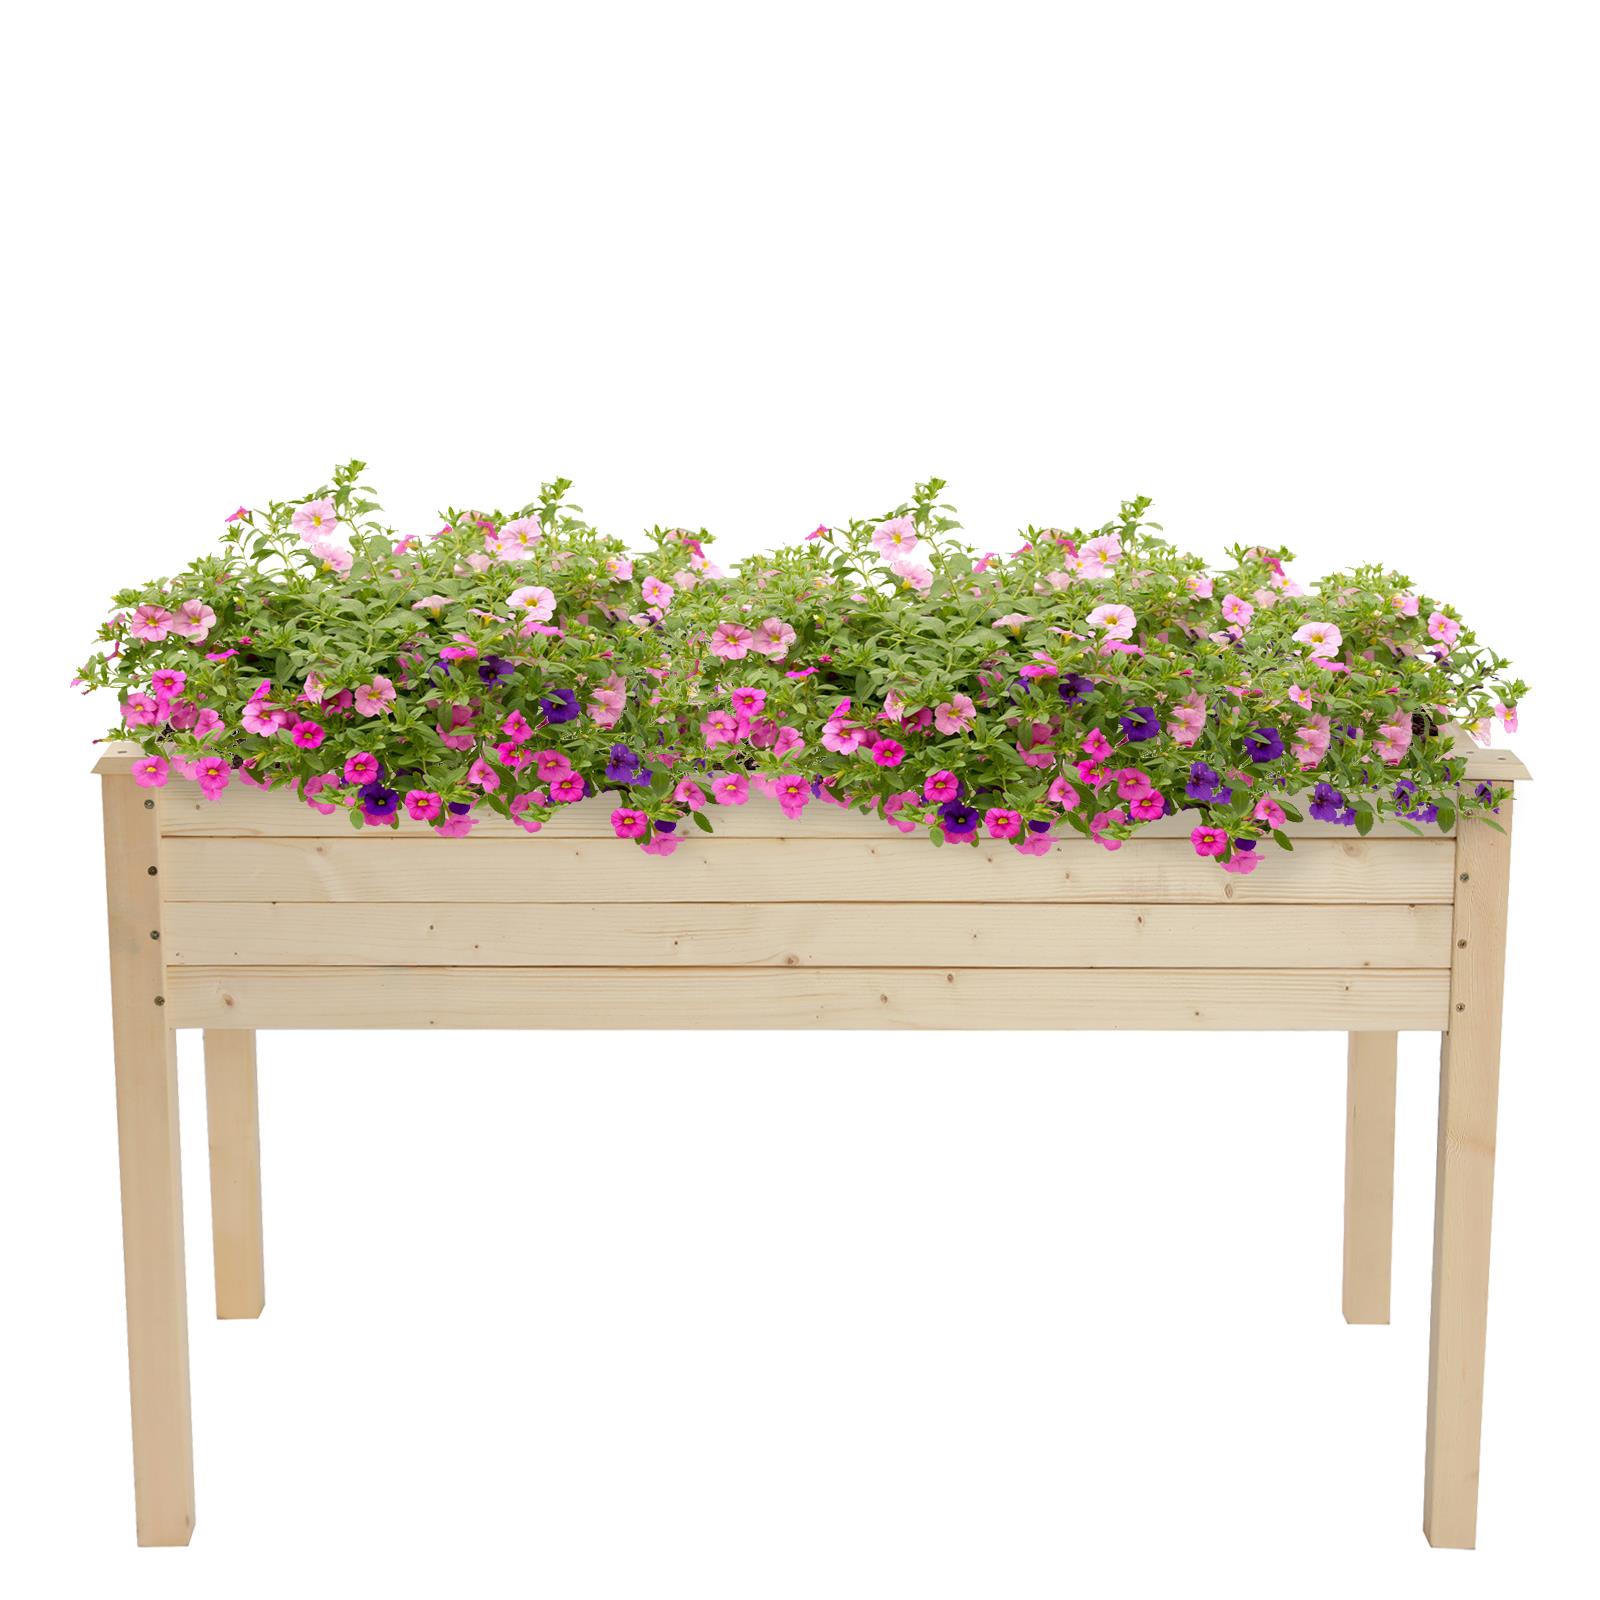 Zimtown 48.83 x 22.44 x 29.92" Outdoor Wooden Raised Garden Bed Planter Raised Bed for Vegetables, Grass, Lawn, Yard - Natural - image 5 of 13